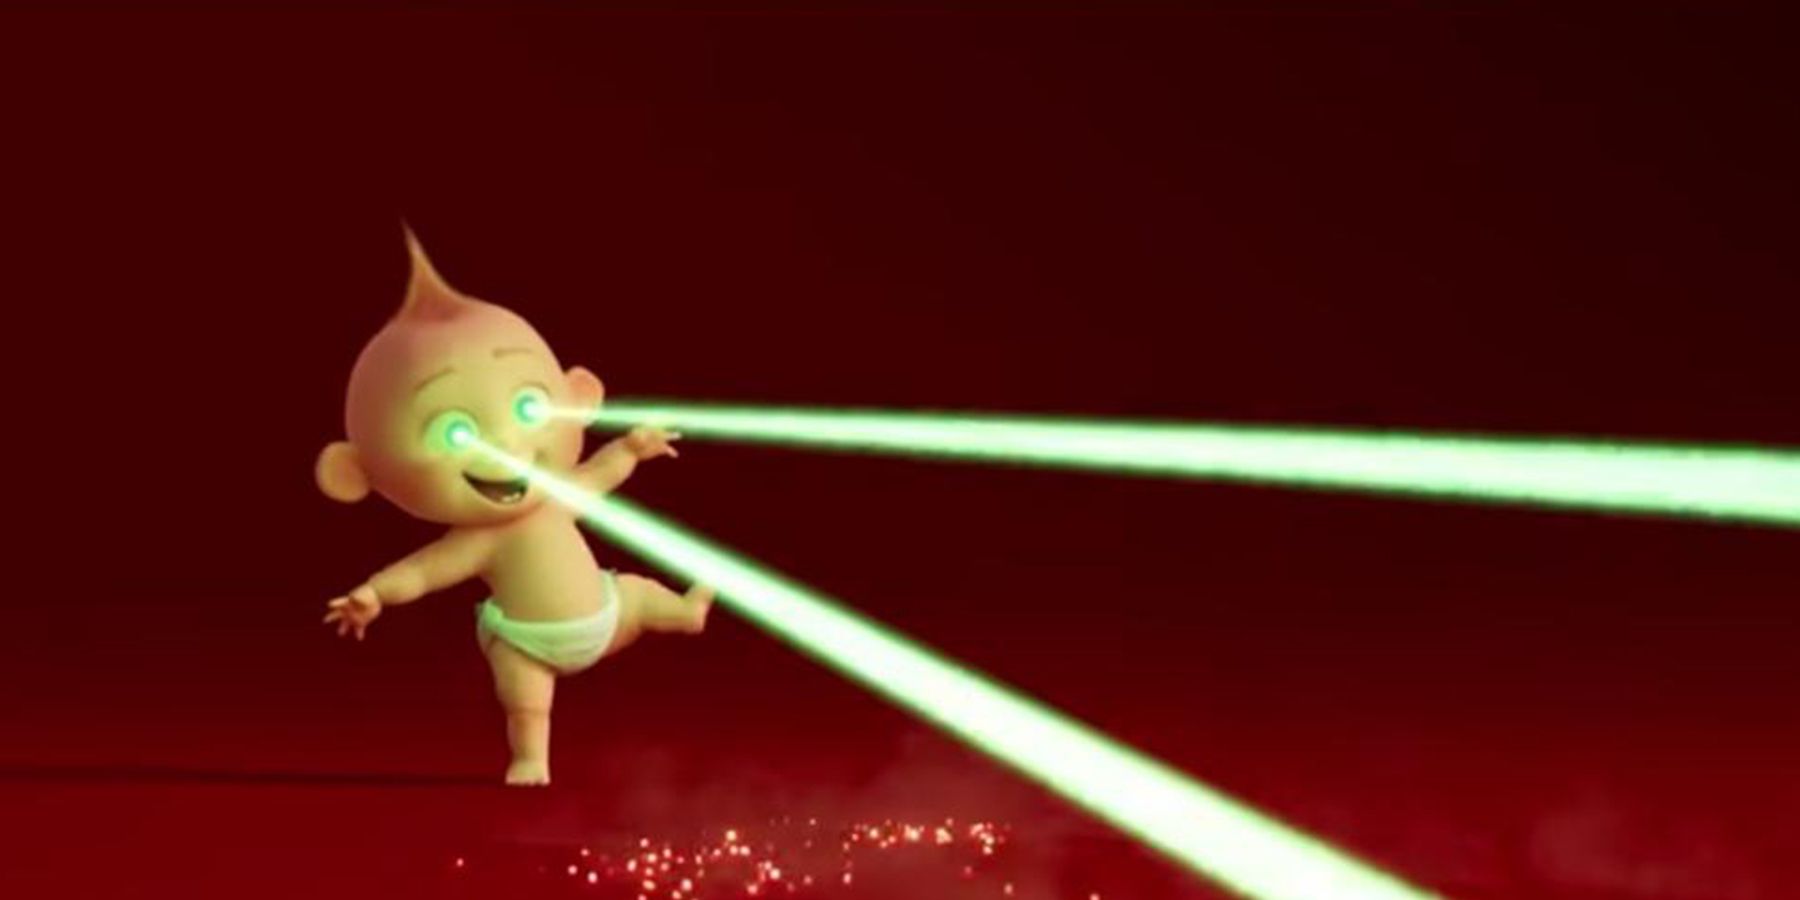 Jack-Jack attacks with eyebeams in The Incredibles